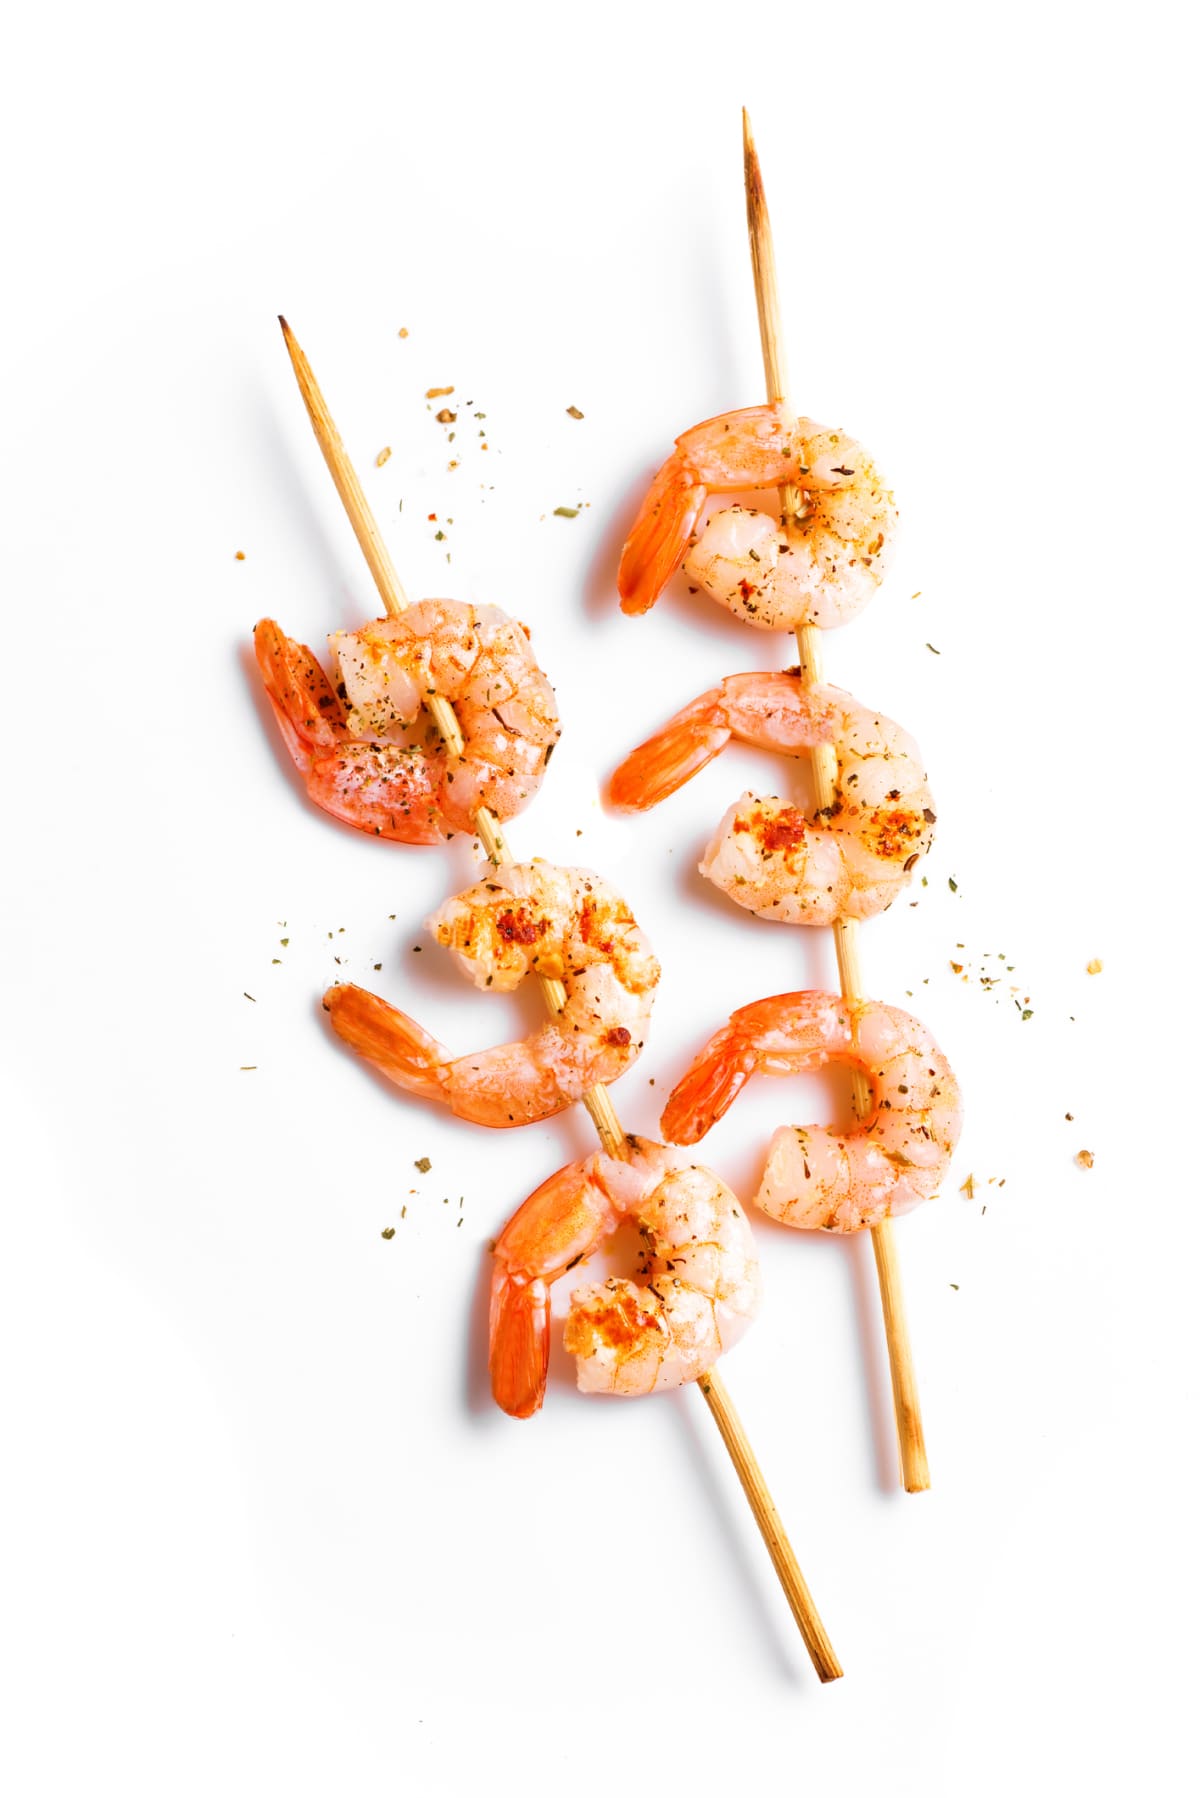 Grilled Shrimp Skewers isolated on white background. Fried spicy prawn seafood on sticks